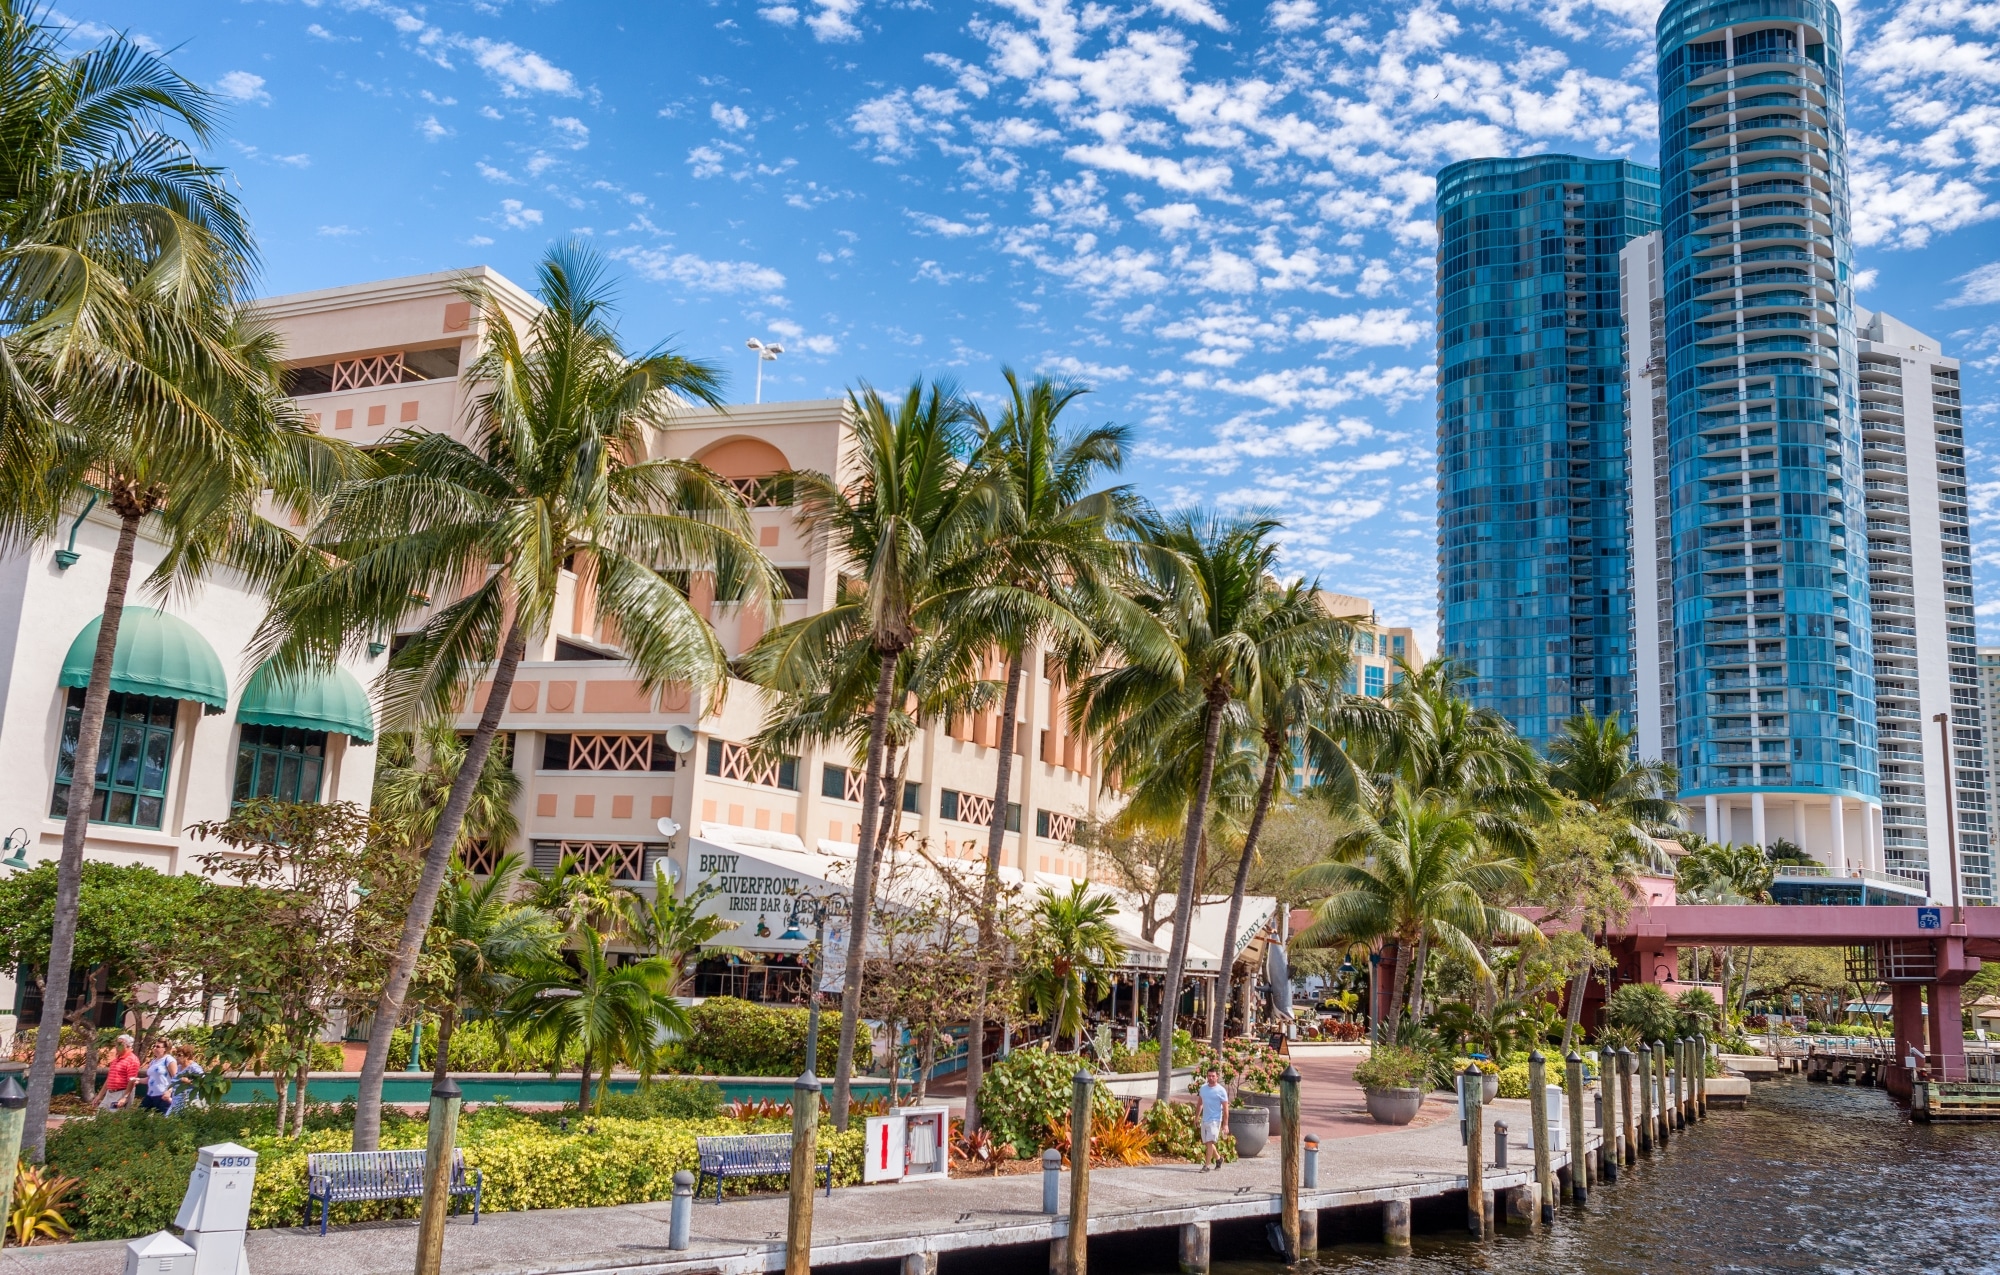 Things to do in Fort Lauderdale Florida